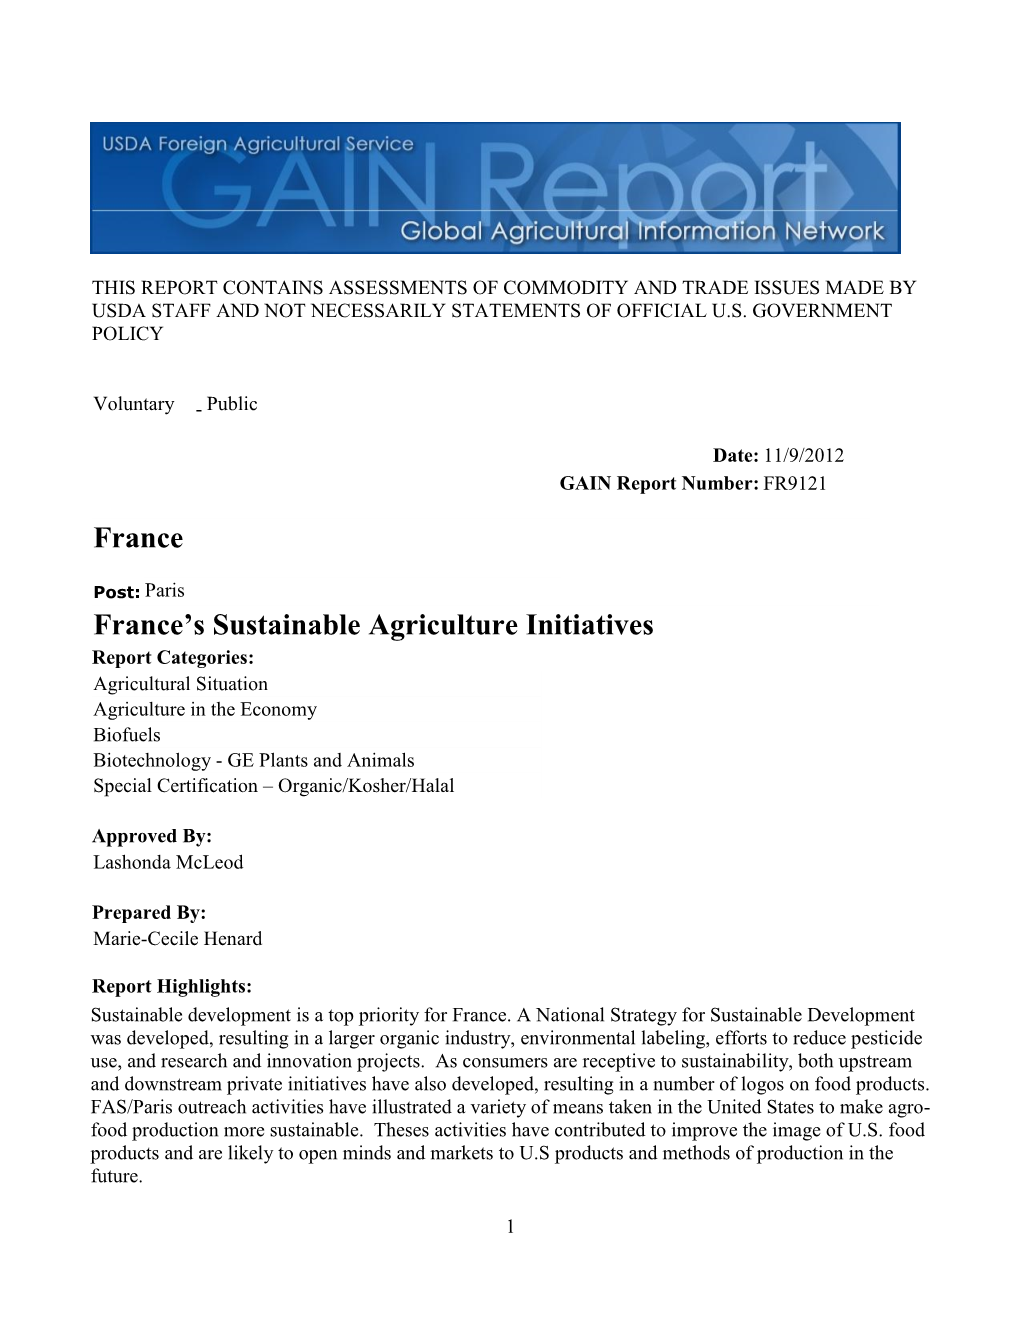 France's Sustainable Agriculture Initiatives